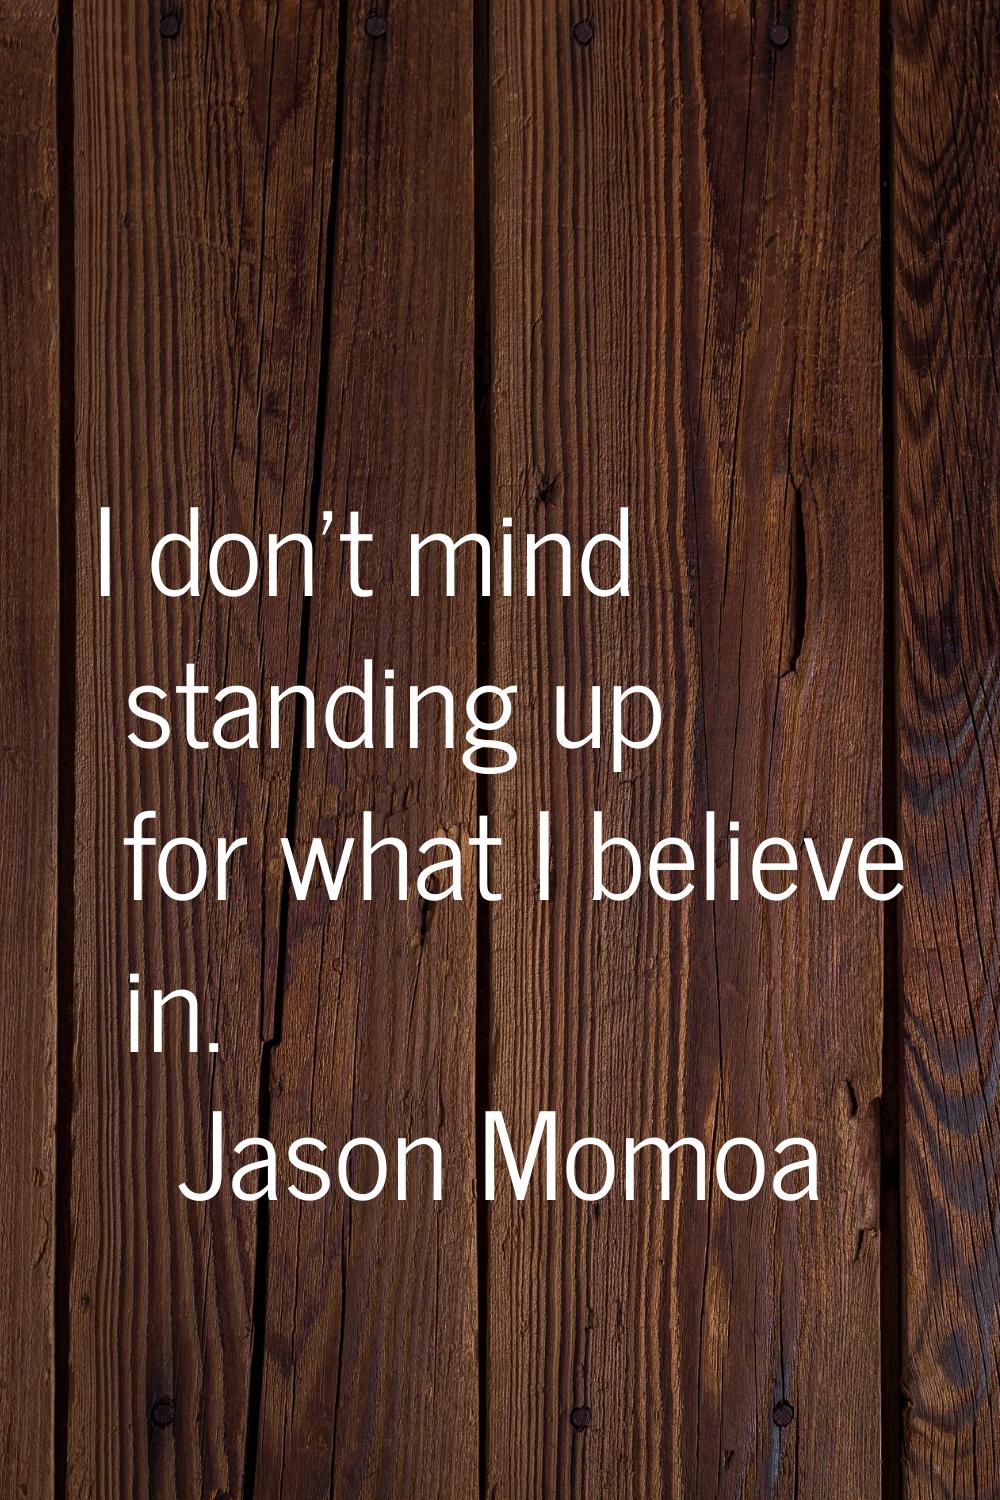 I don't mind standing up for what I believe in.